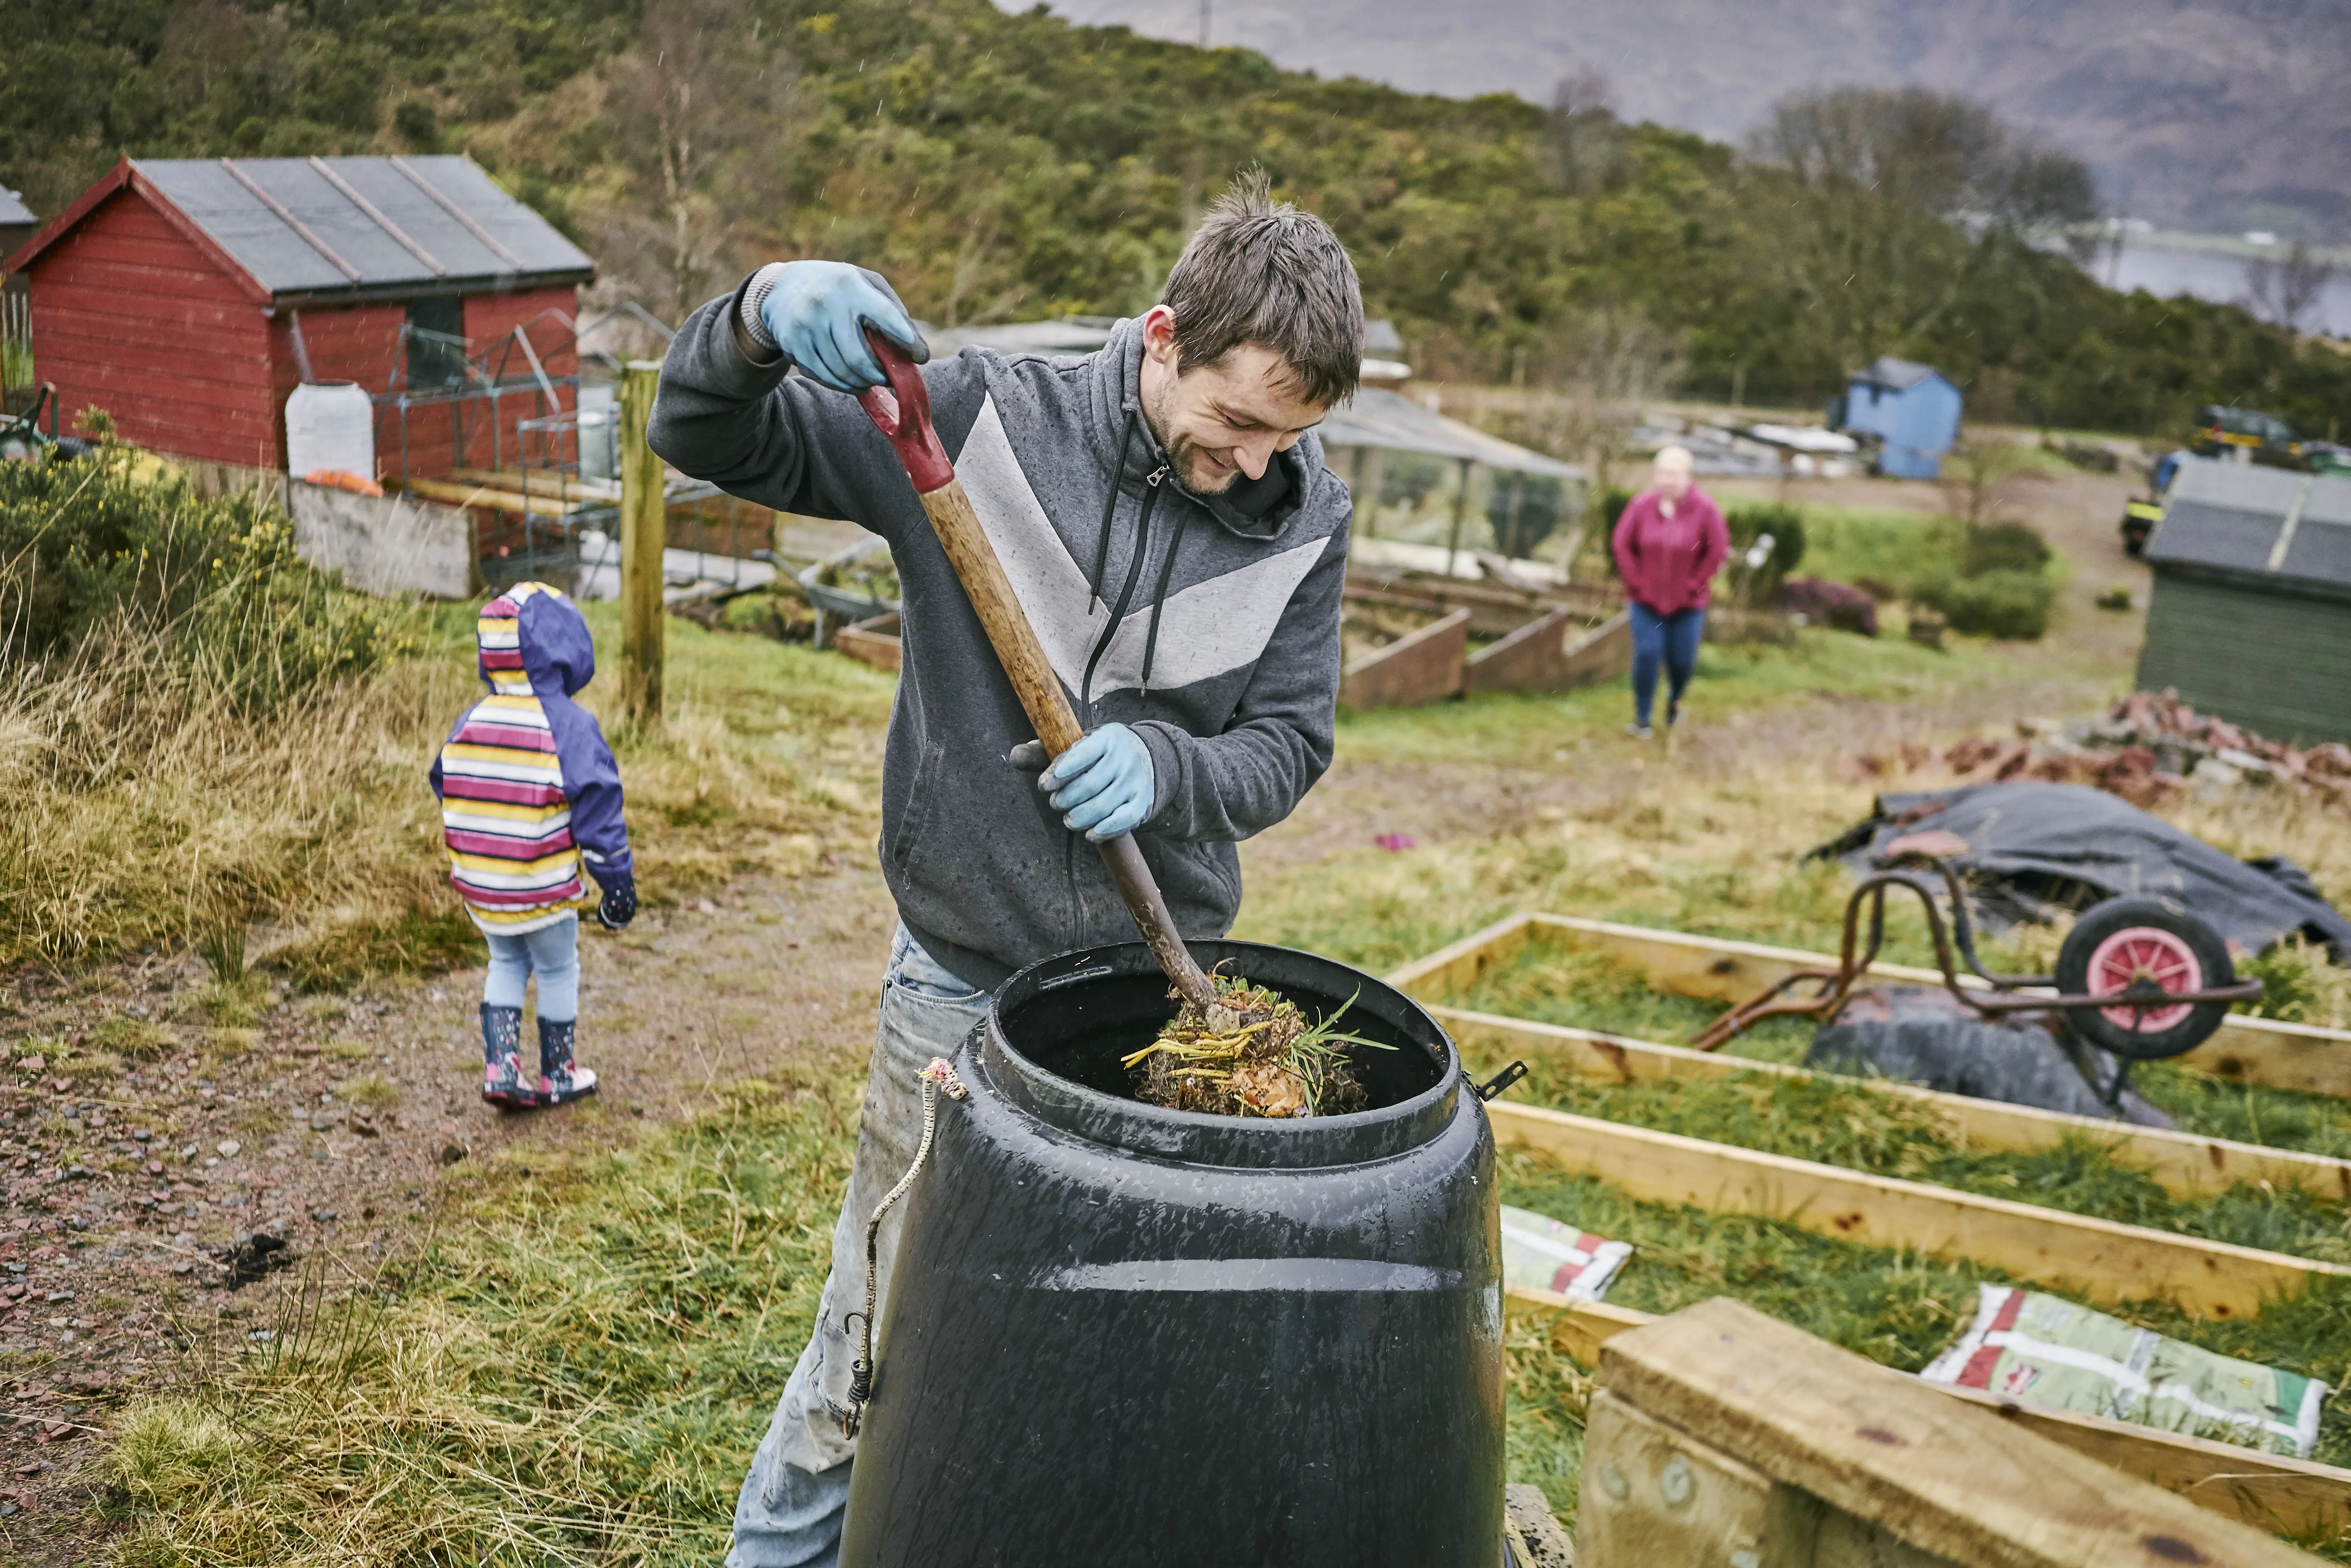 Man uses pitch fork to turn compost in plastic compost bin, with terraced raised beds and sheds of other plots behind him, as well as child and woman.